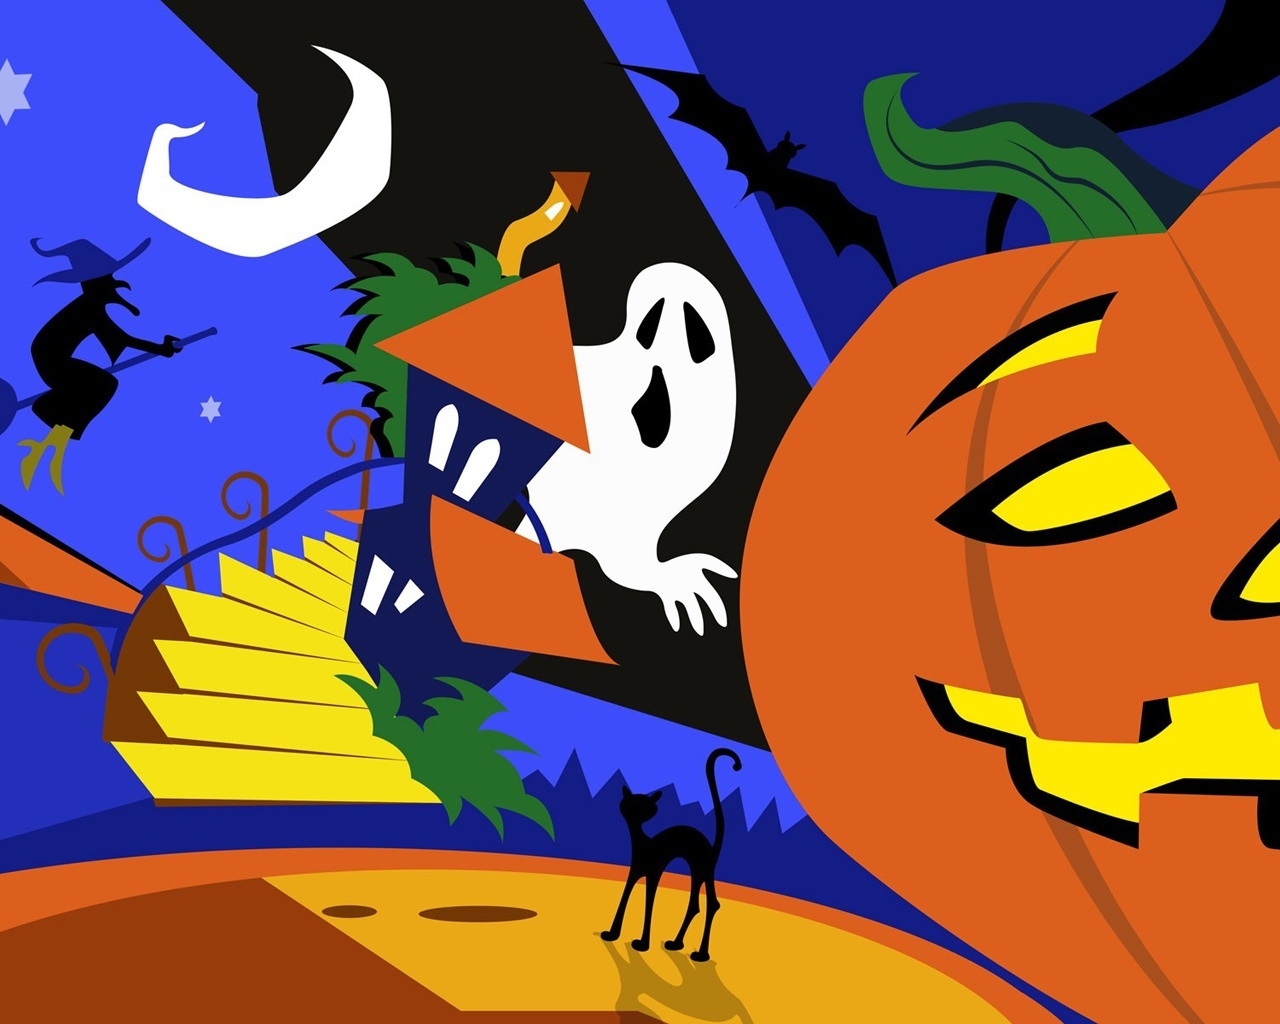 Colourful Halloween Art for 1280 x 1024 resolution